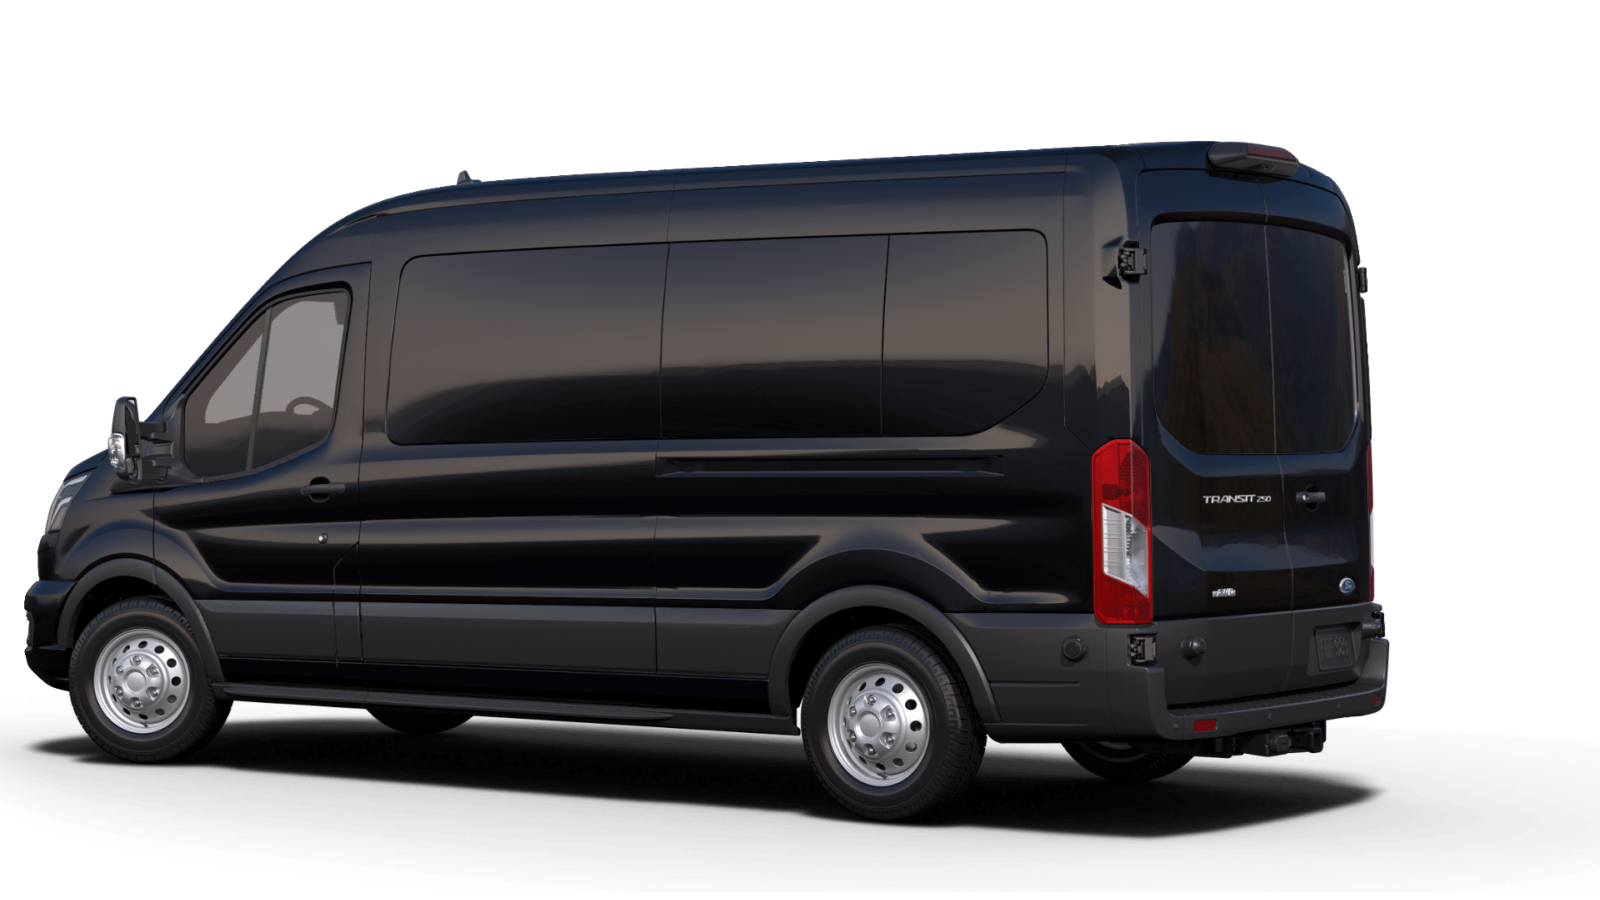 ford passenger van lease cost